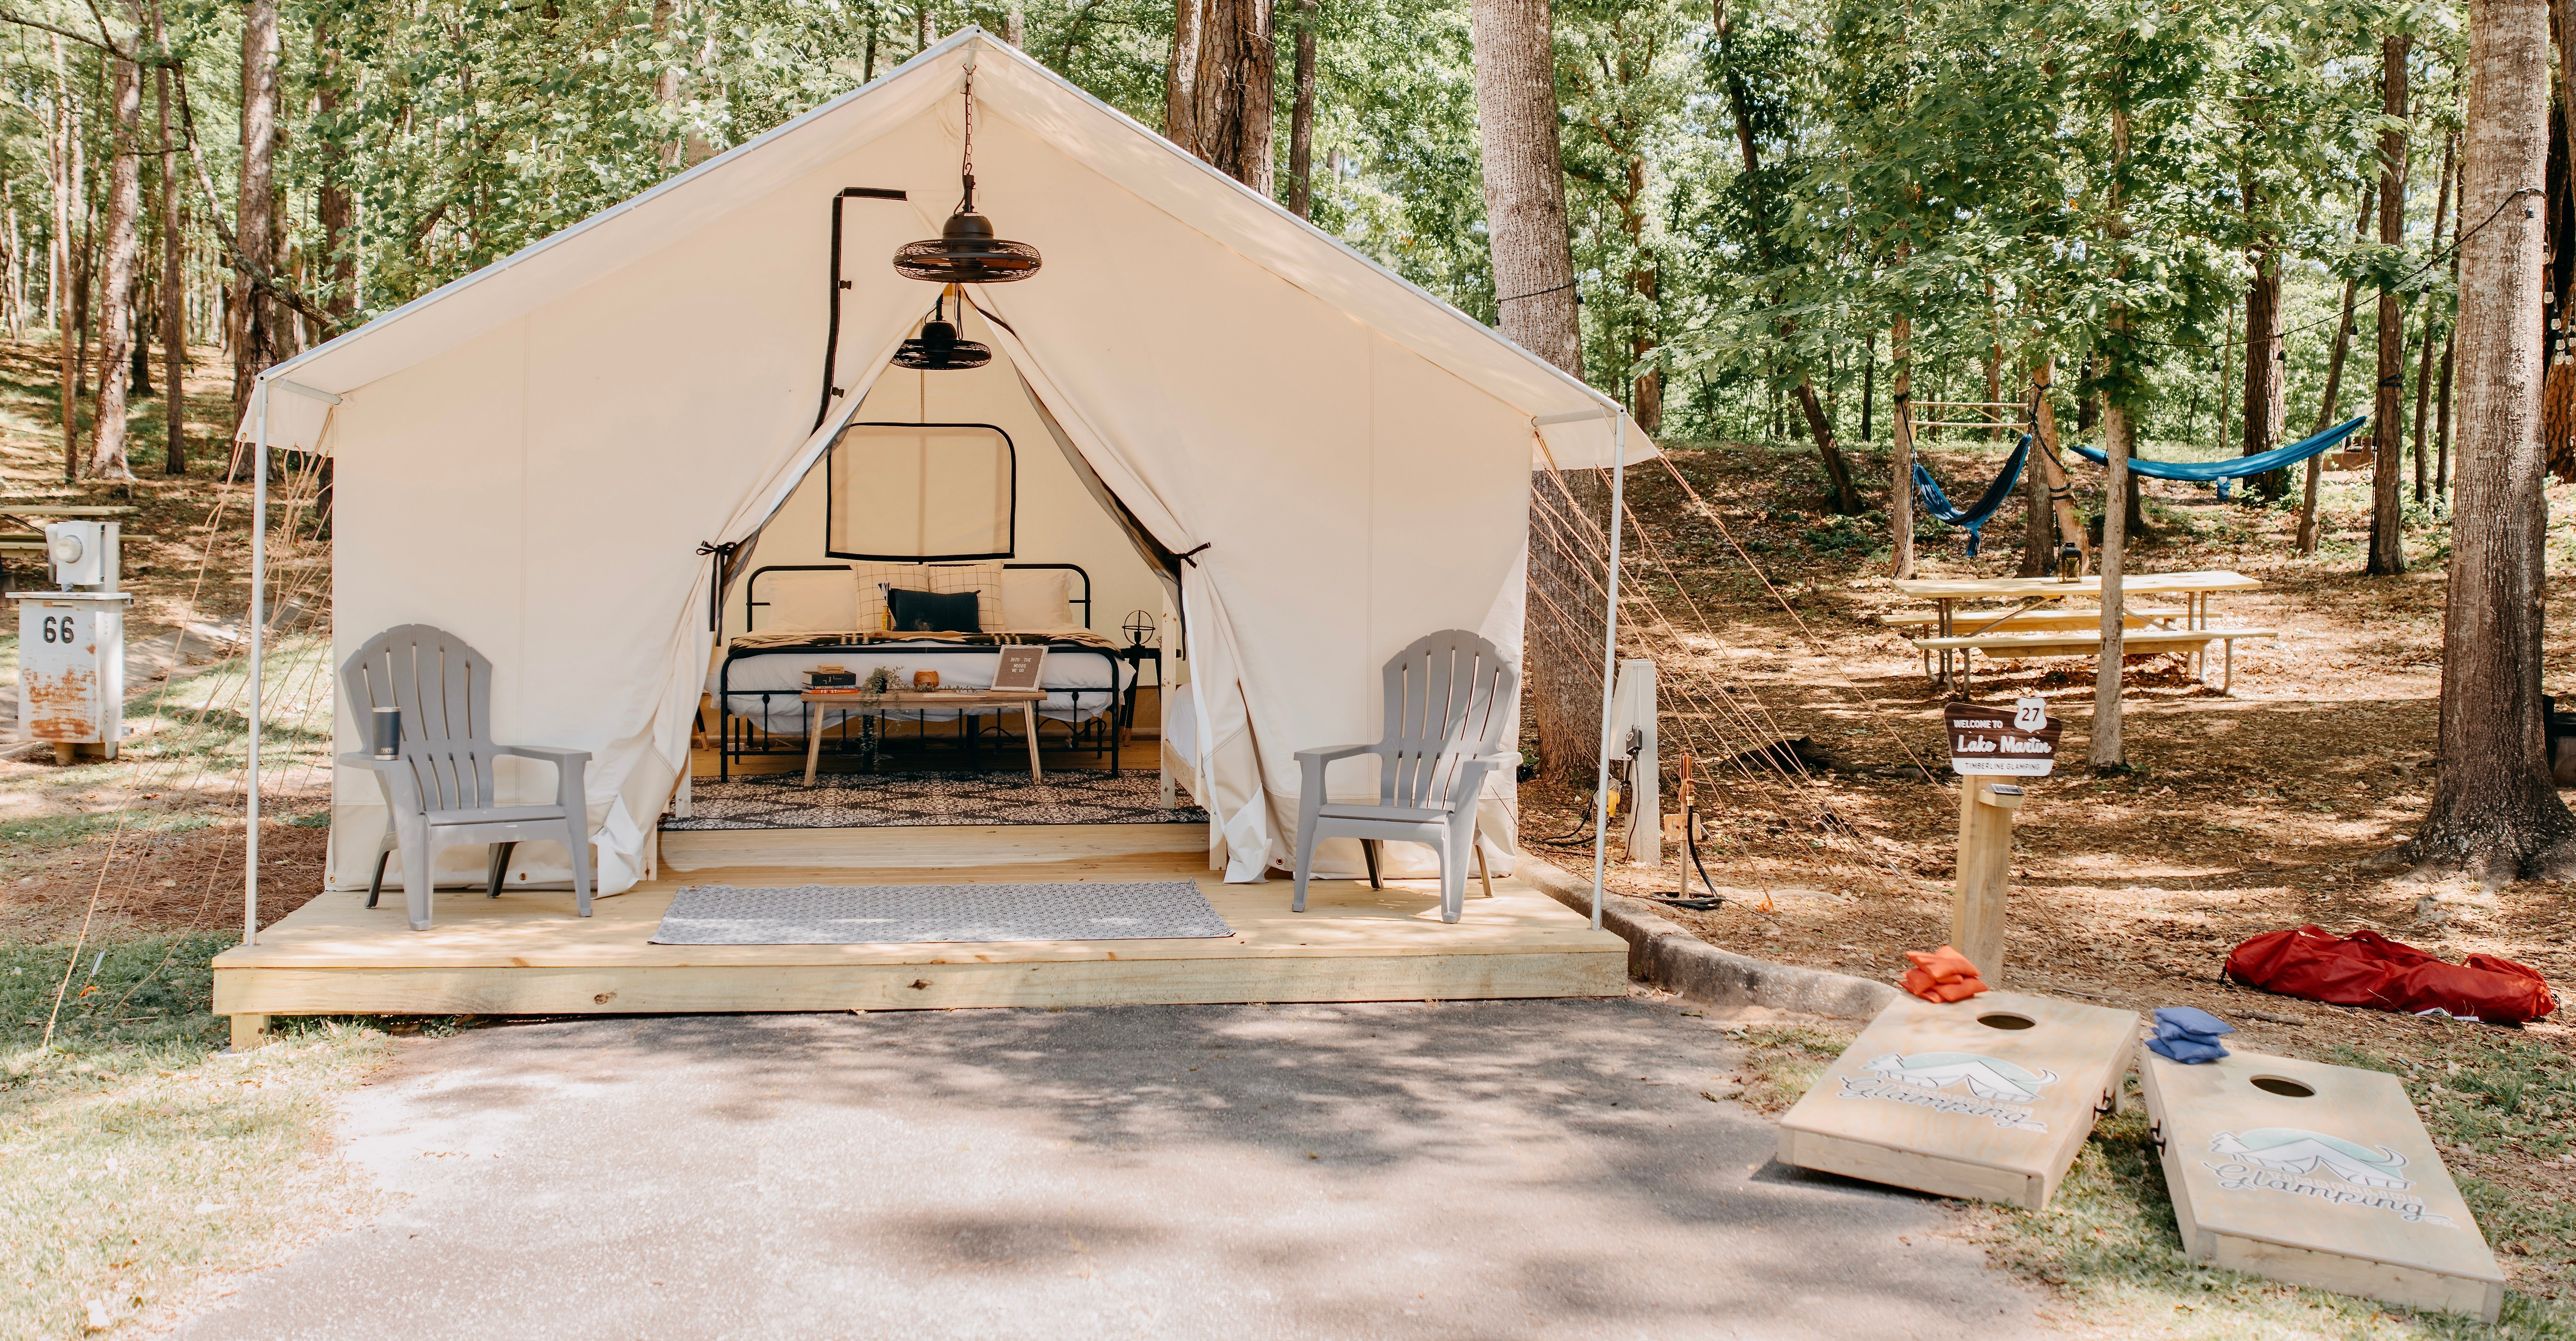 Glamping Expands to More Alabama State Parks